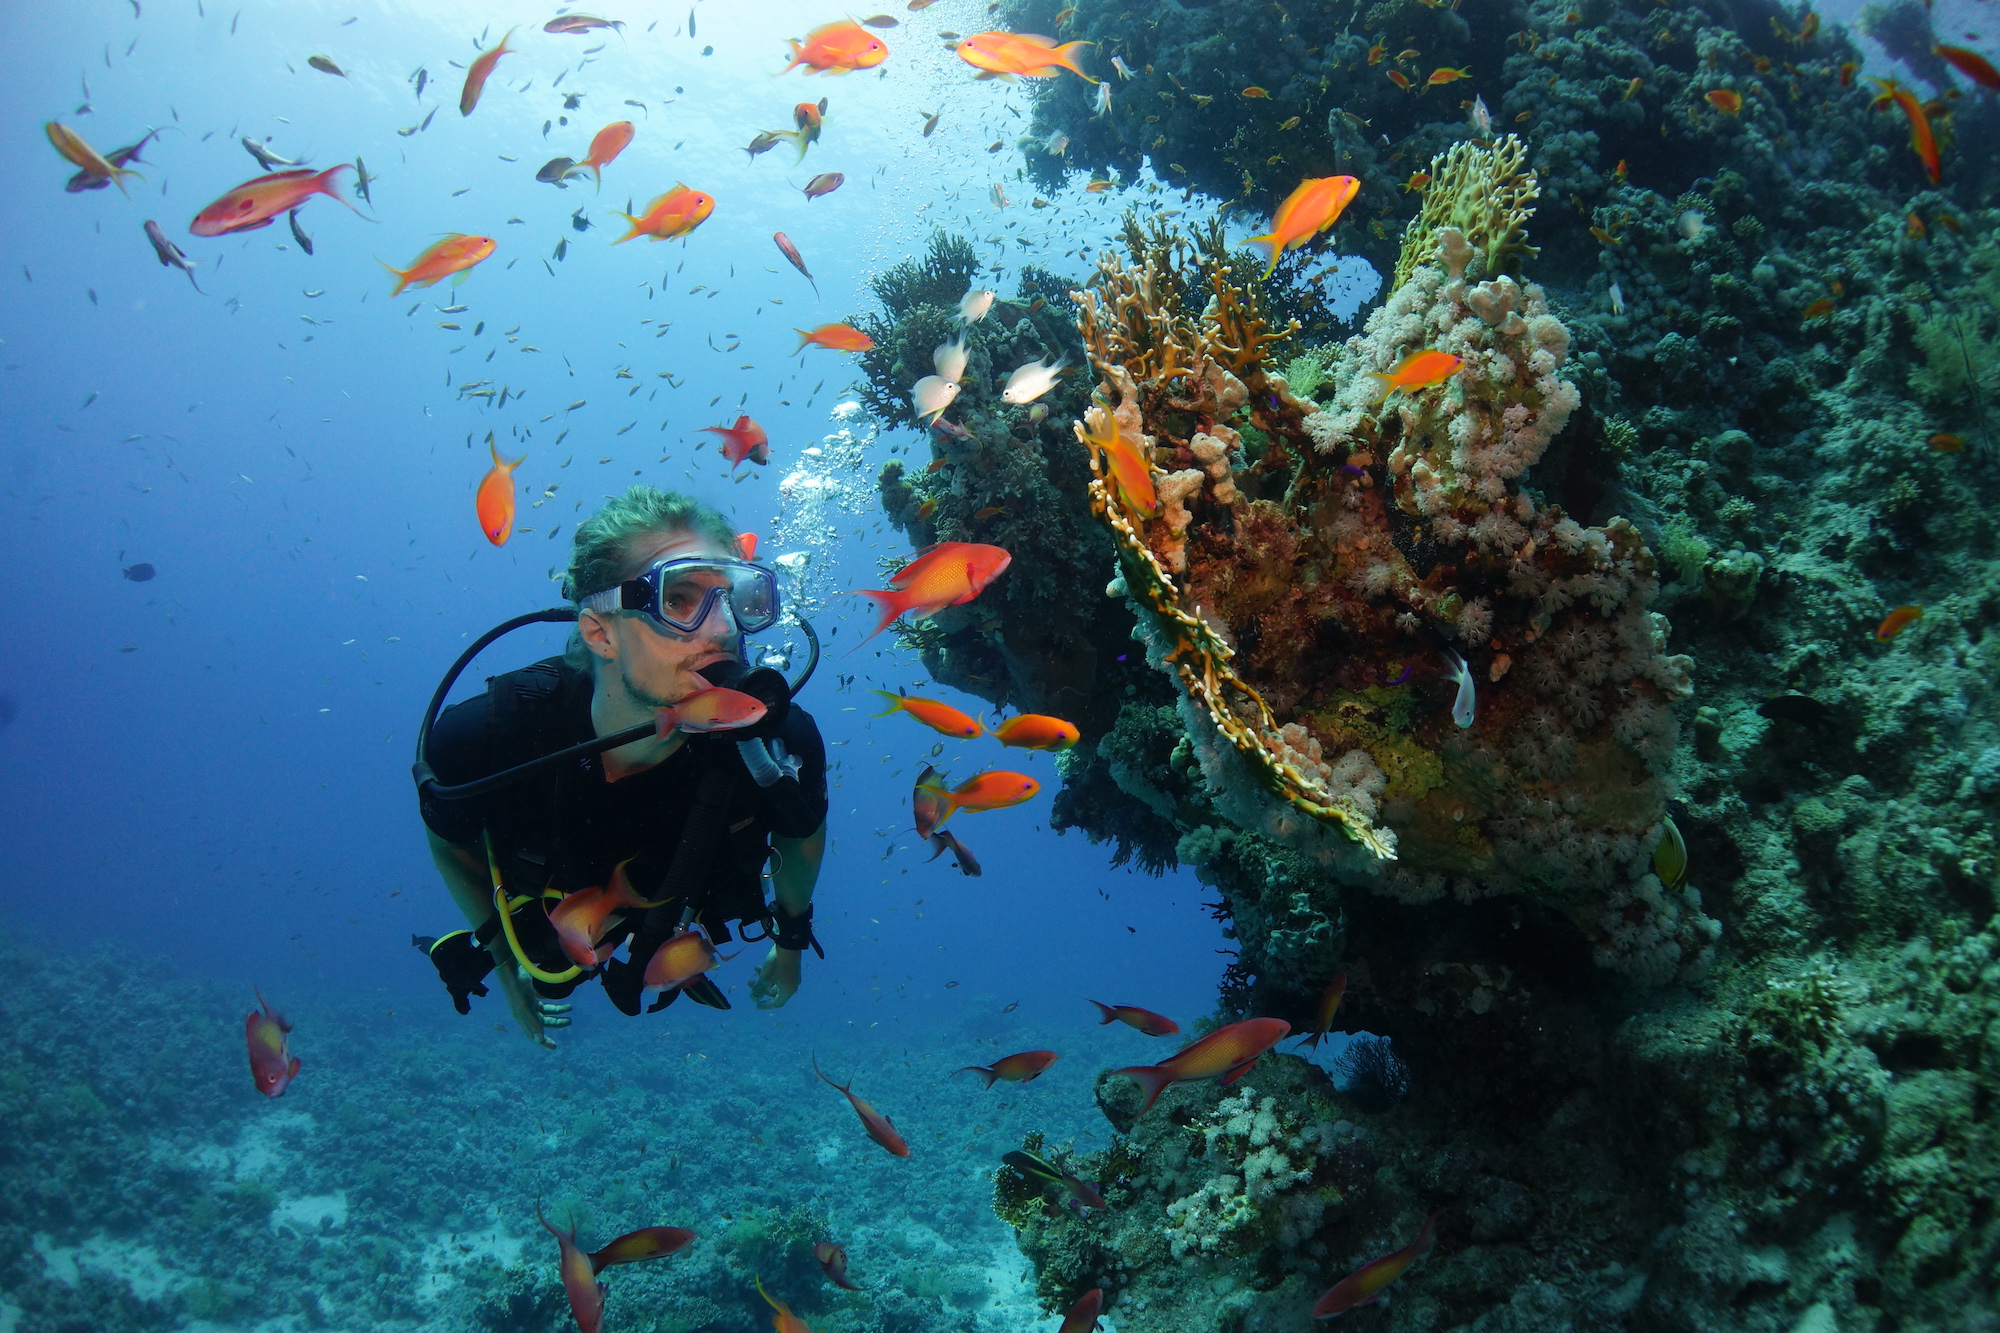 The 12 Top-Rated Places to Learn to Scuba Dive in 2023